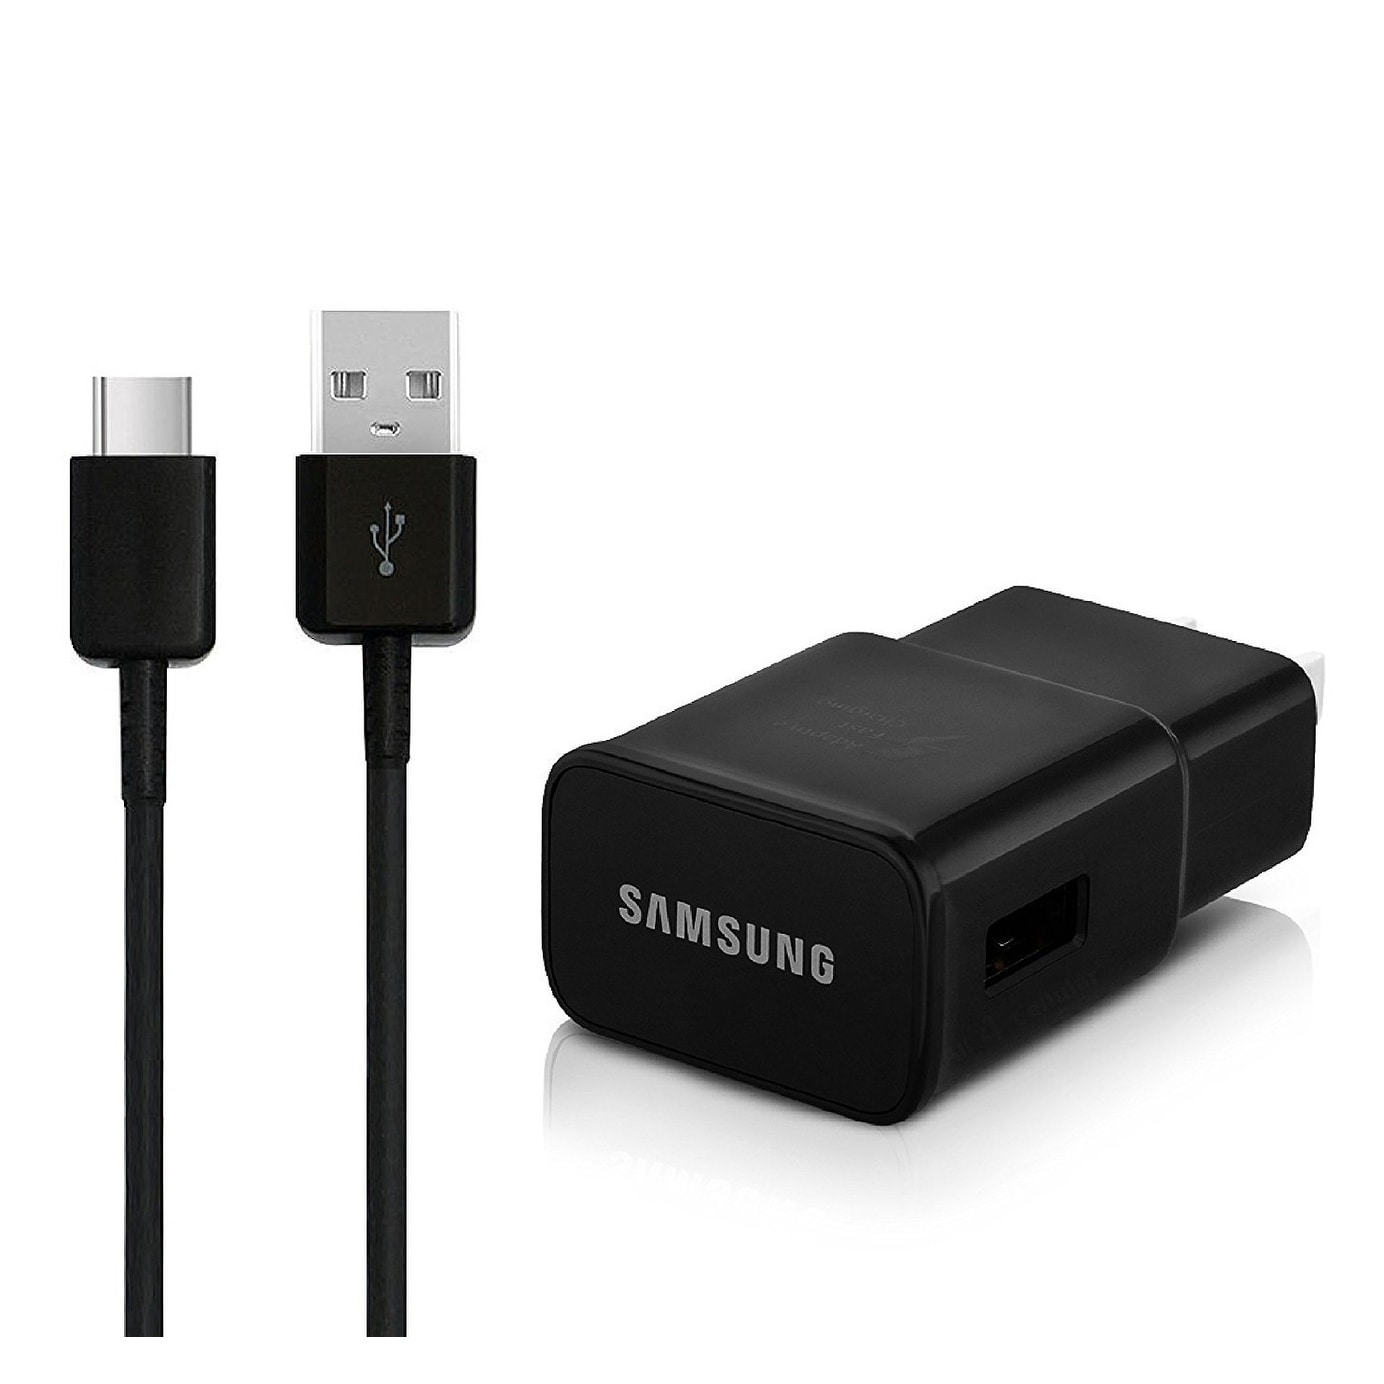 Samsung Wall Fast Charger Usb Type C Cable 10ft For Galaxy S9 And S9 Plus Black 3 5 X 2 X 2 Overstock